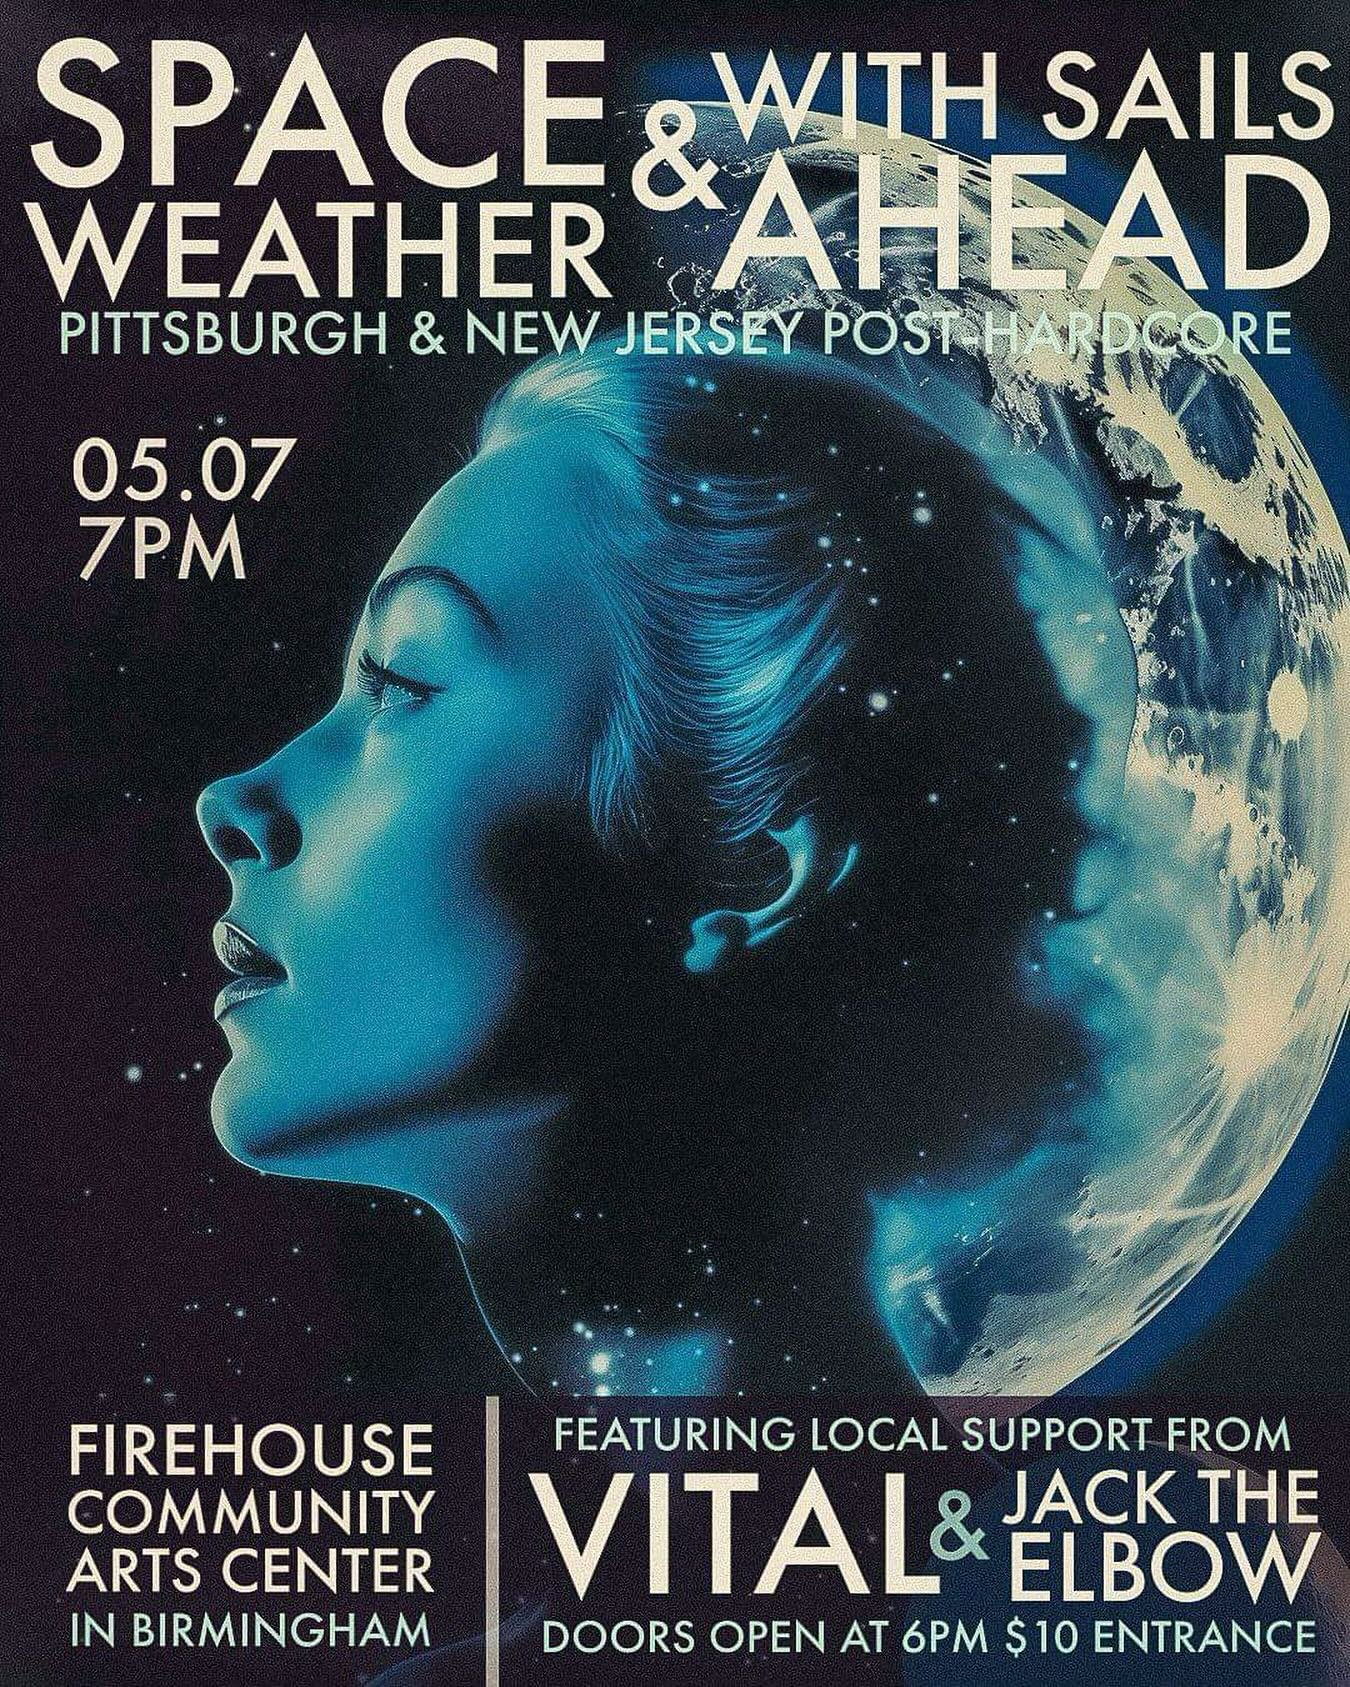 This week, mid-week! @spaceweathermusic and @withsailsahead with everyone&rsquo;s favorite local rabble rousers, @vitalbhm and @jacktheelbow at @firehousecommunity !

No alcohol, respect the space!